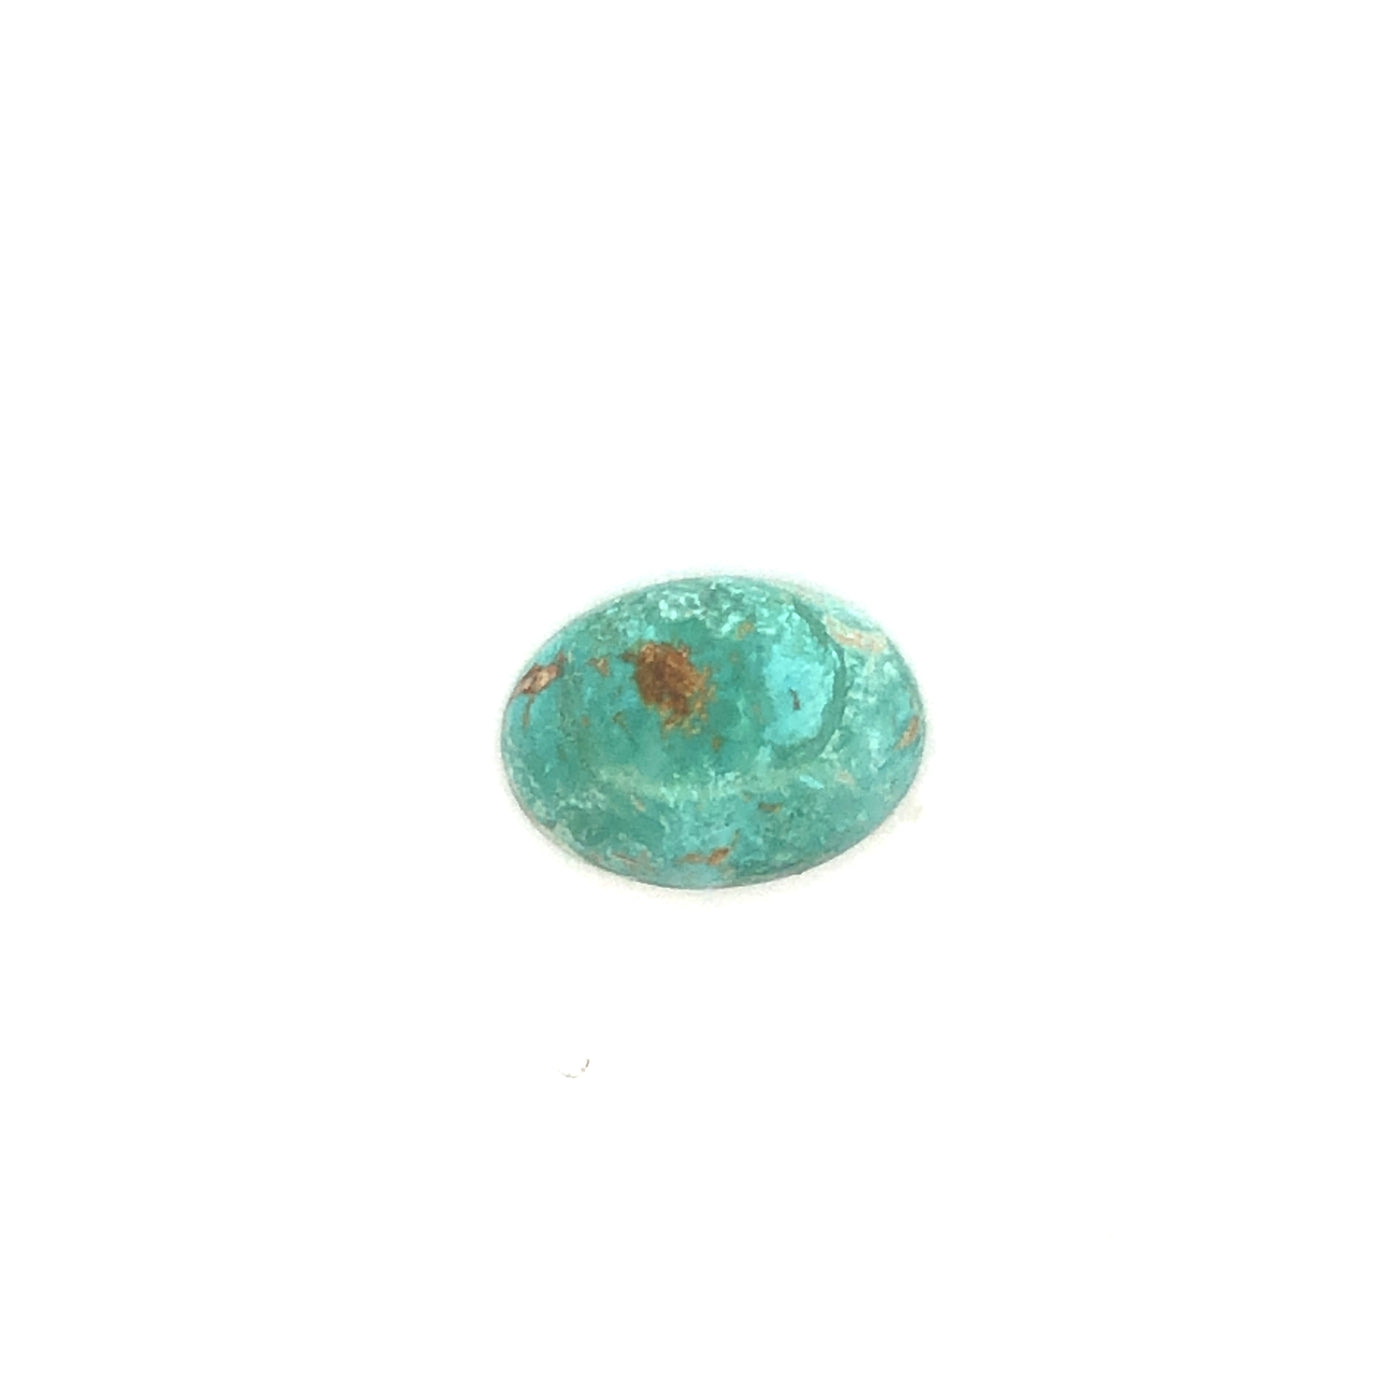 Loose Narooma Turquoise Oval Shaped 11.89Ct Blue With Some Brown